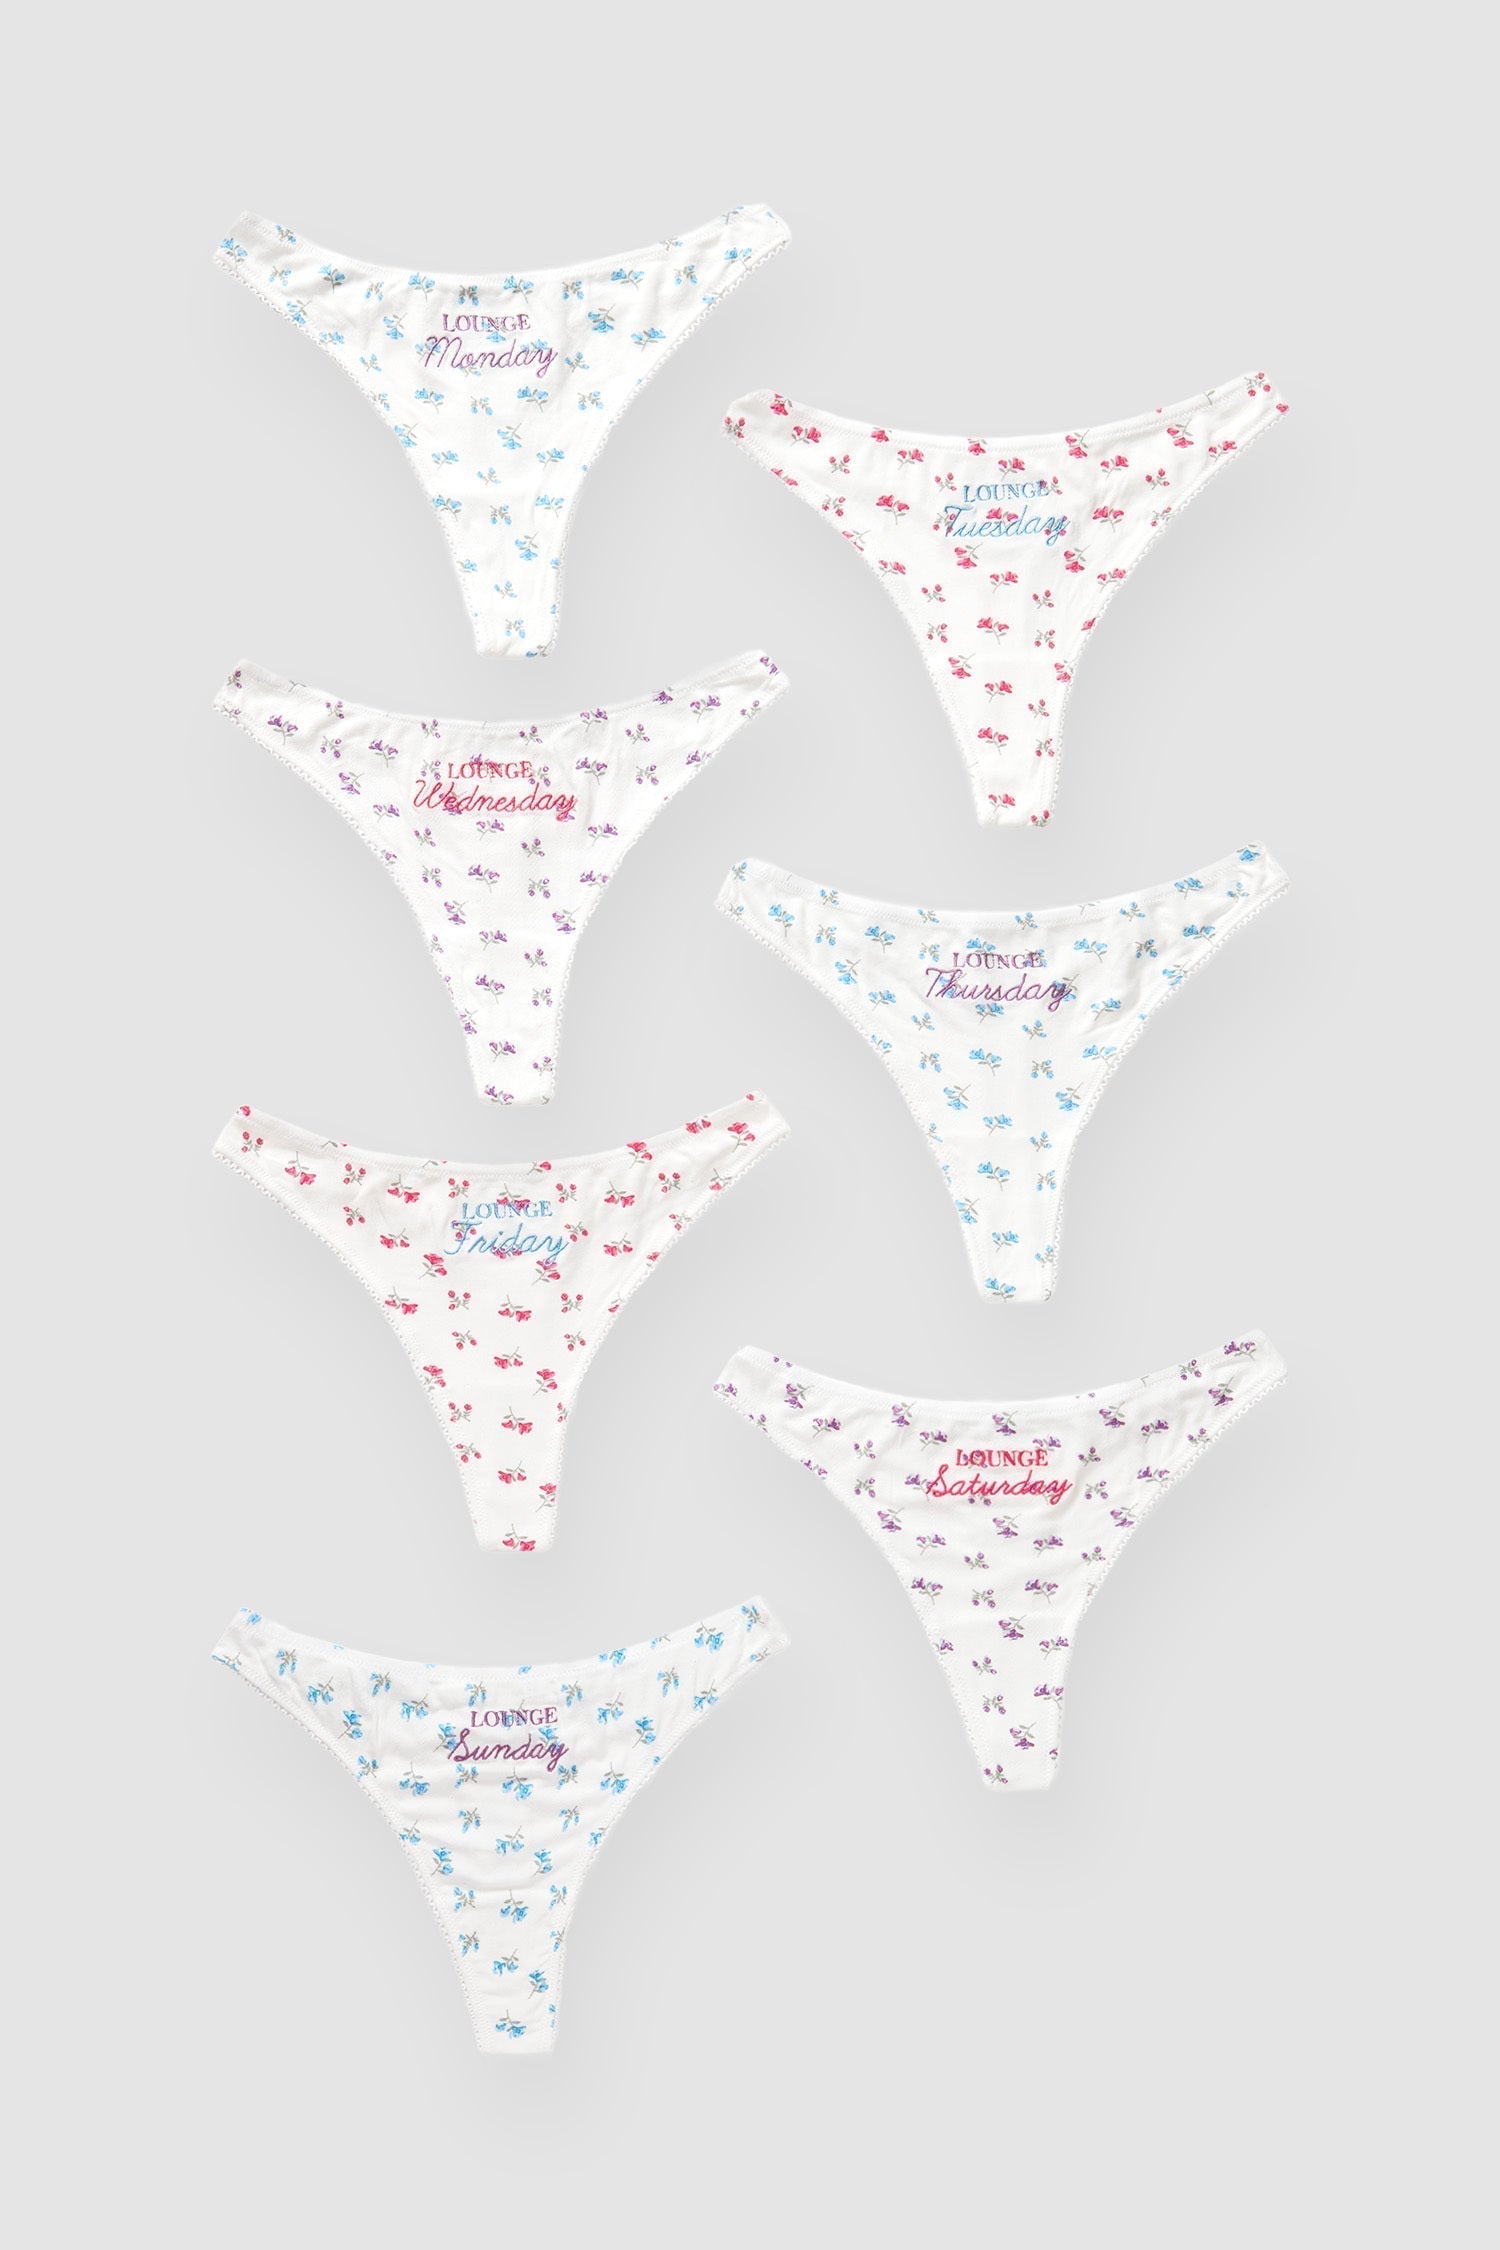 Days of the Week Panties, 7 Days of the Week Women's Thong, Sexy